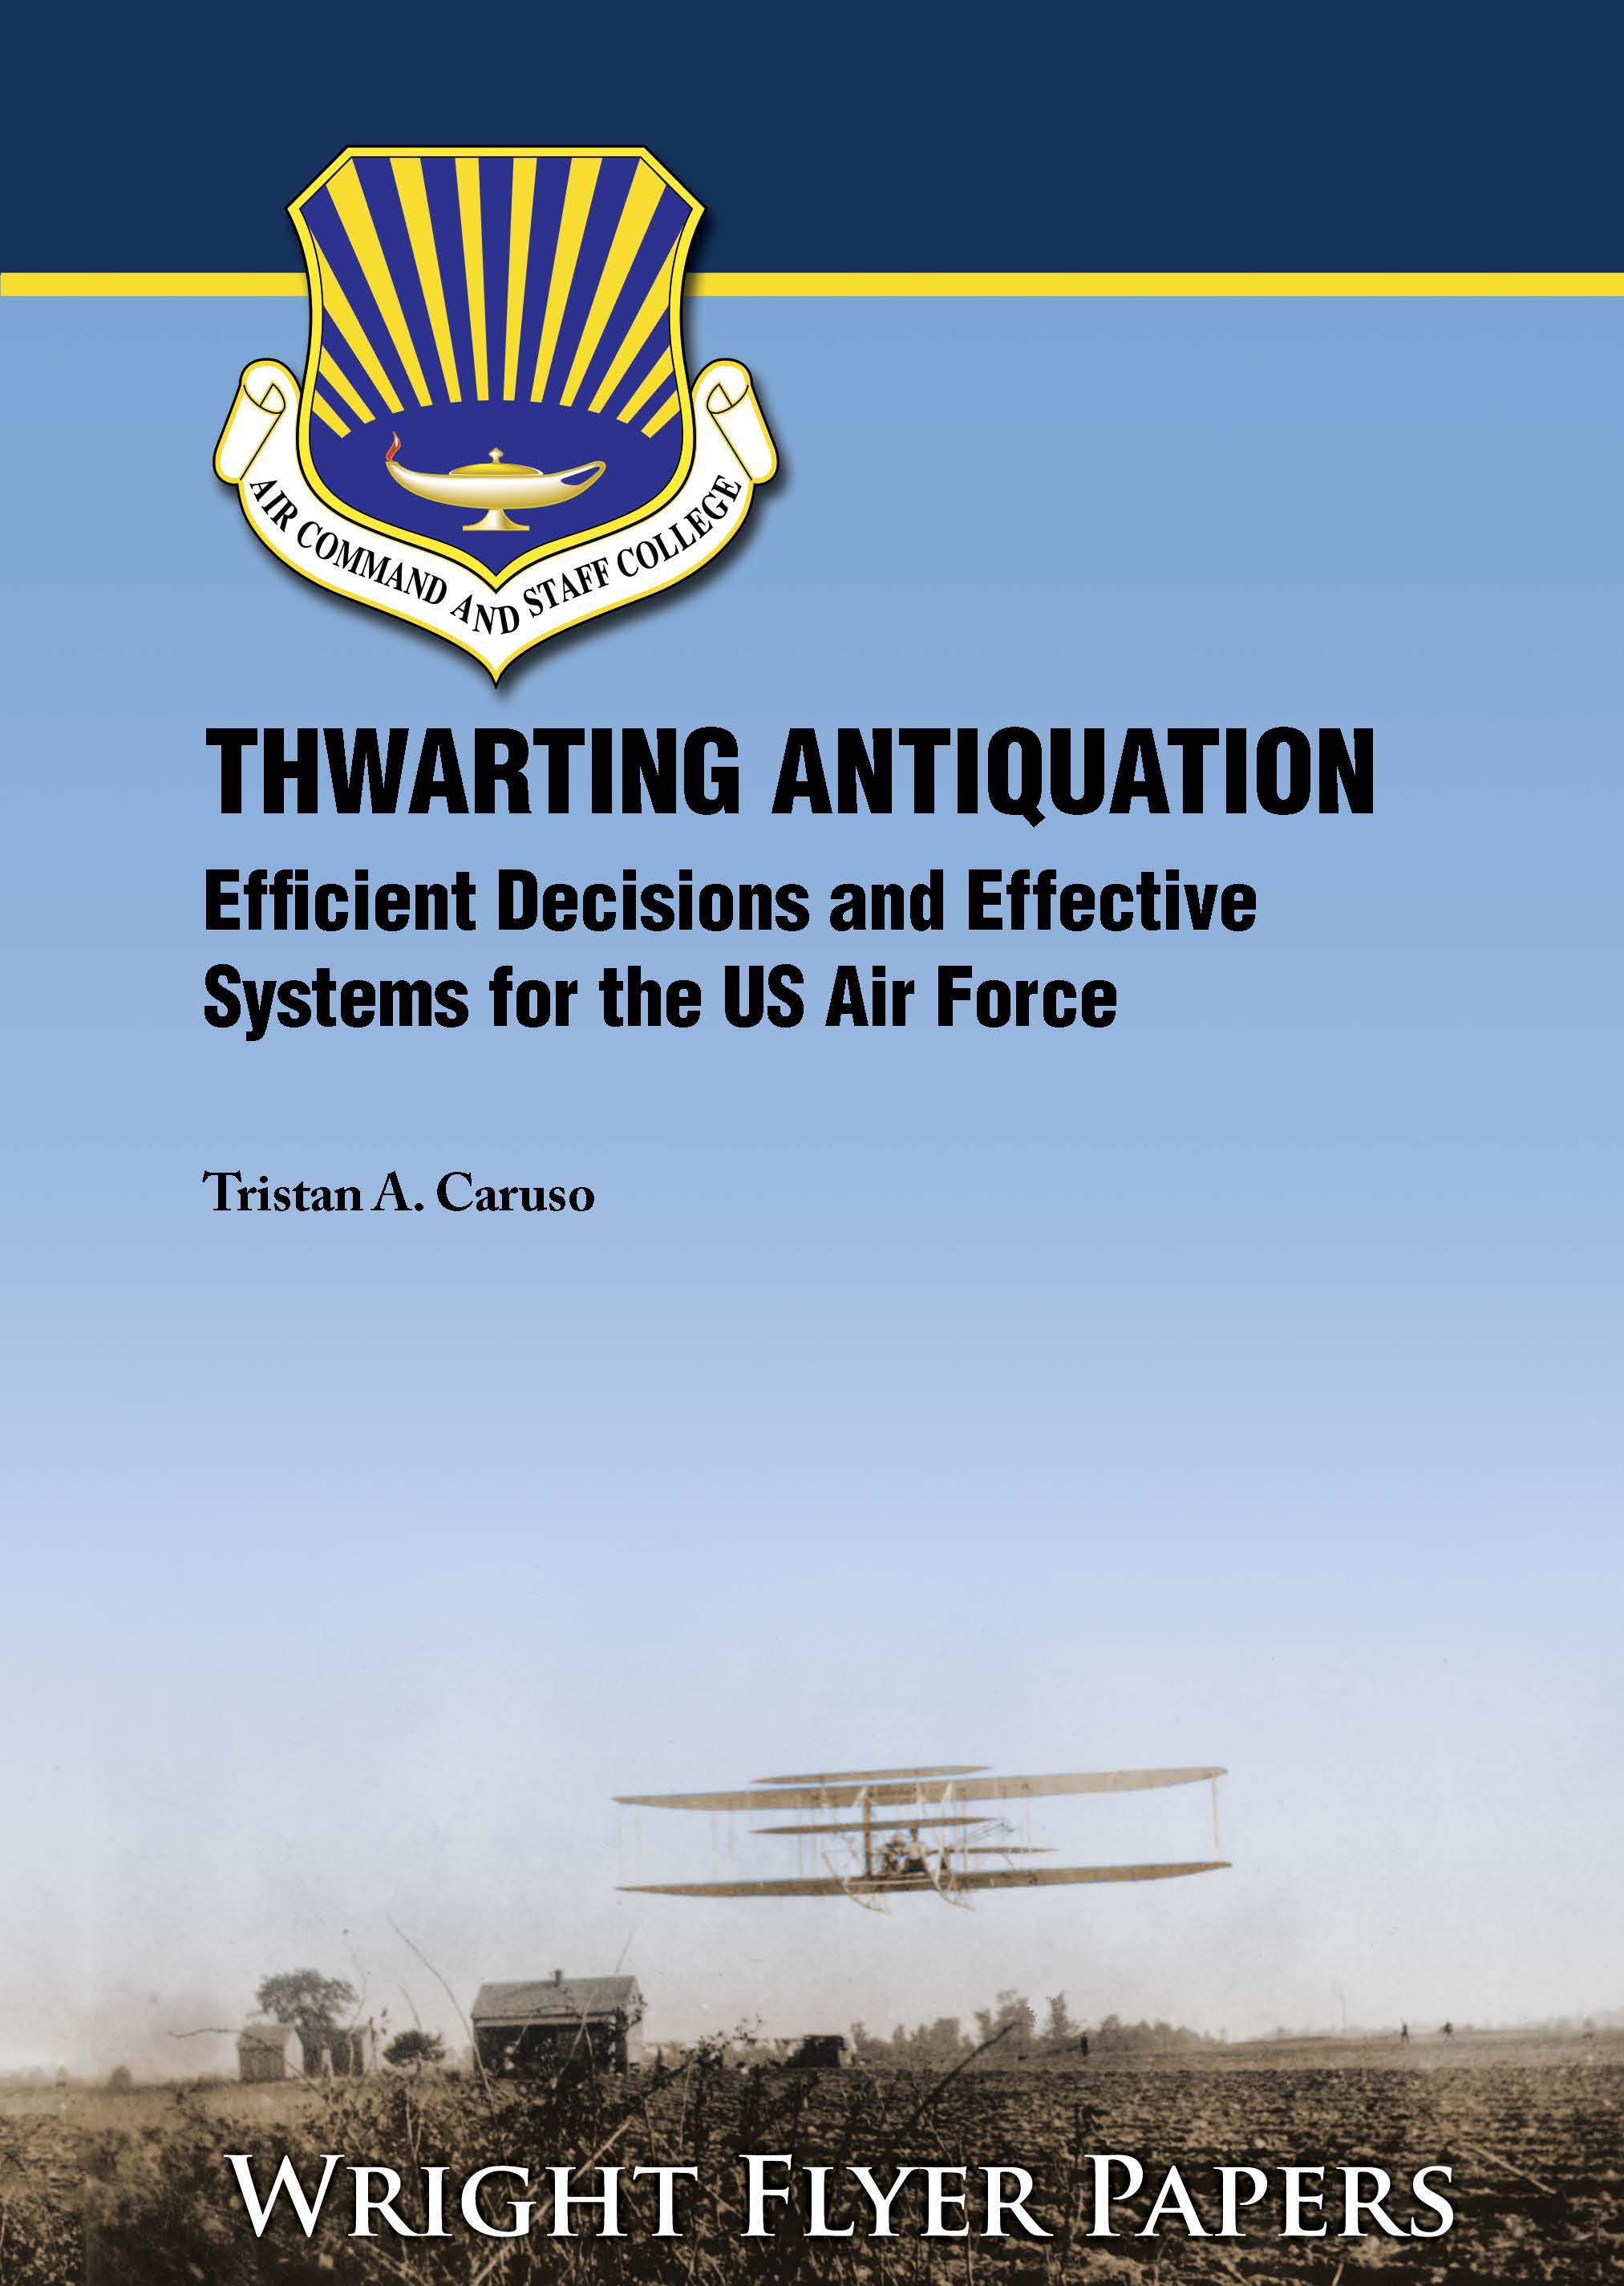 AU Press releases Wright Flyer paper: Thwarting Antiquation